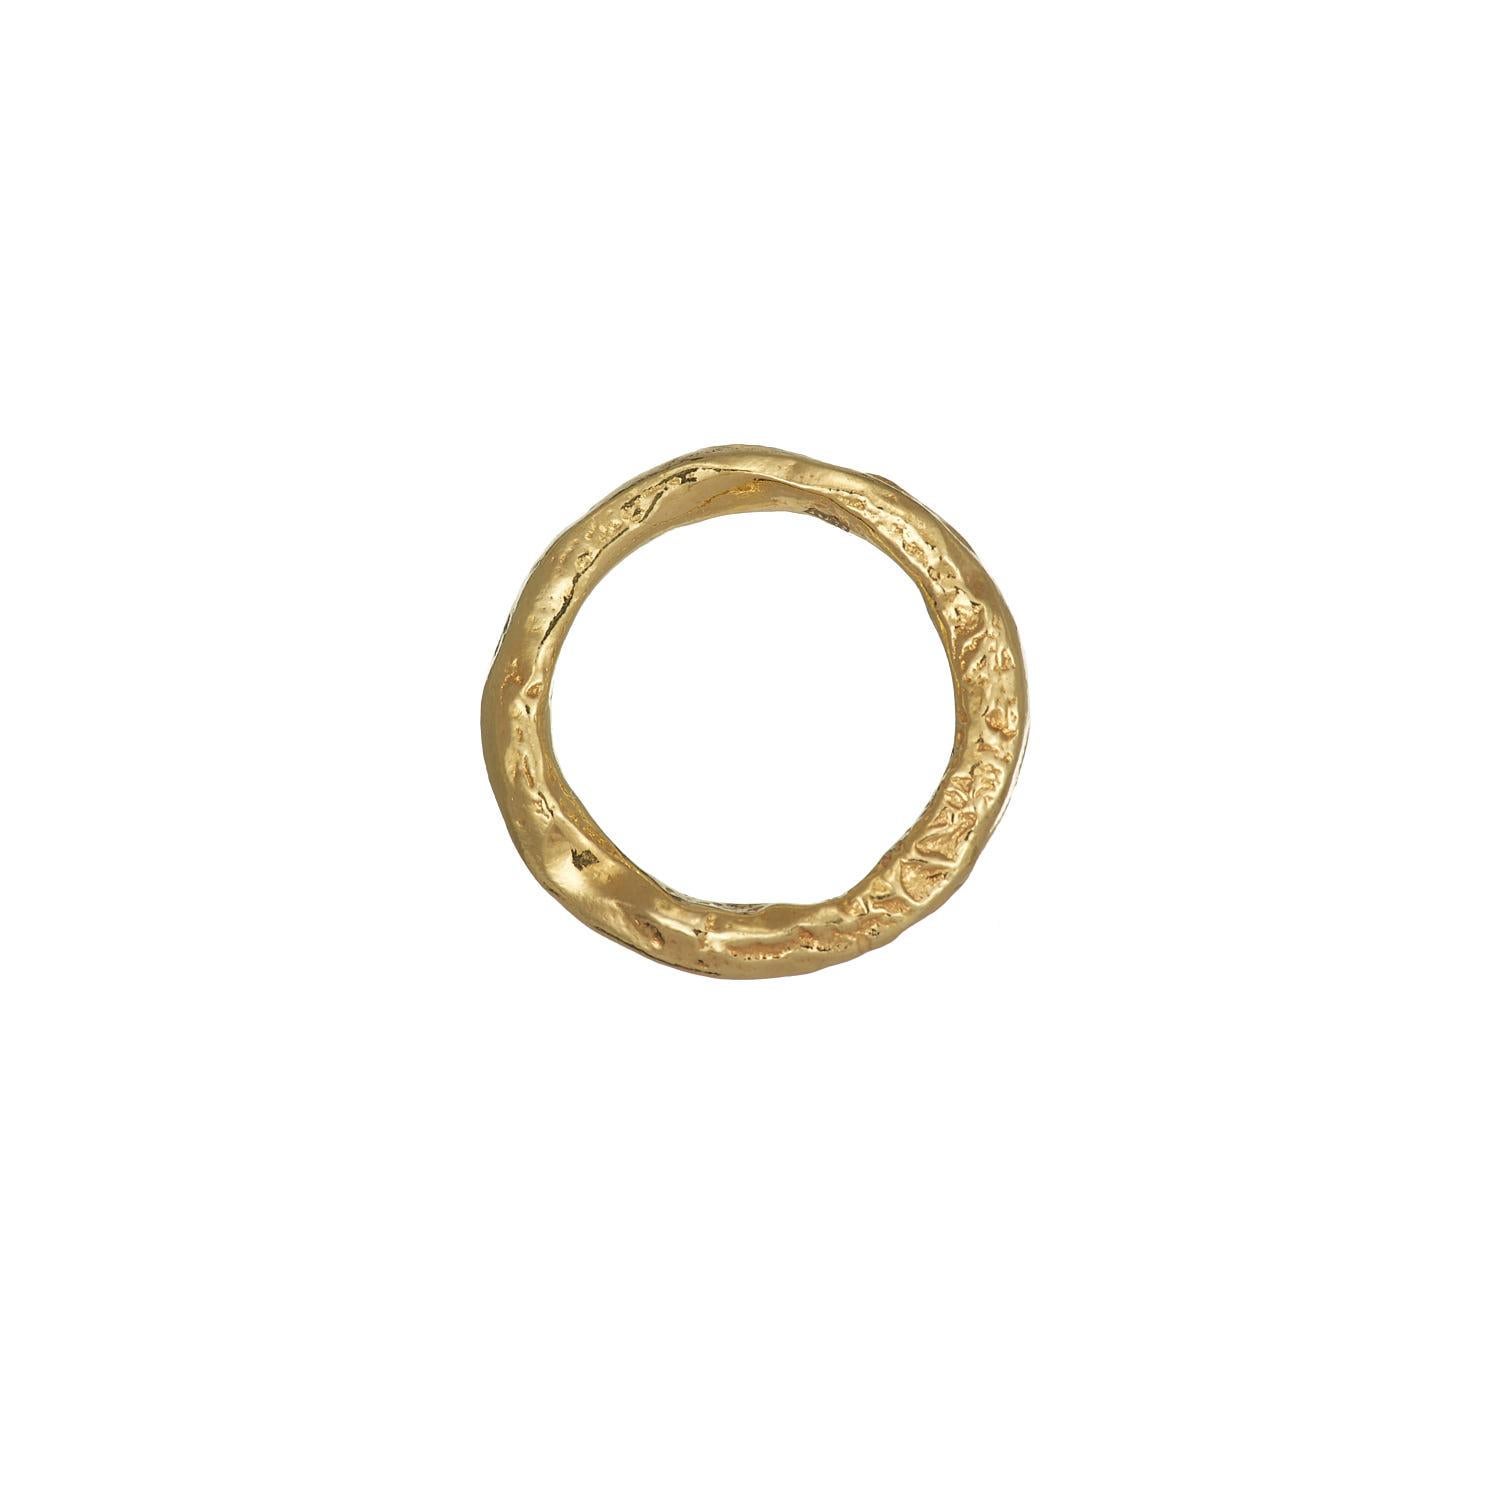 Papua Ring is handcrafted from 24ct gold plated sterling gold.

Papua New Guinea, an island in the southwestern Pacific Ocean, is the world's most diverse country, with more than 700 native tongues. Papua New Guinea jewelry were originally made of